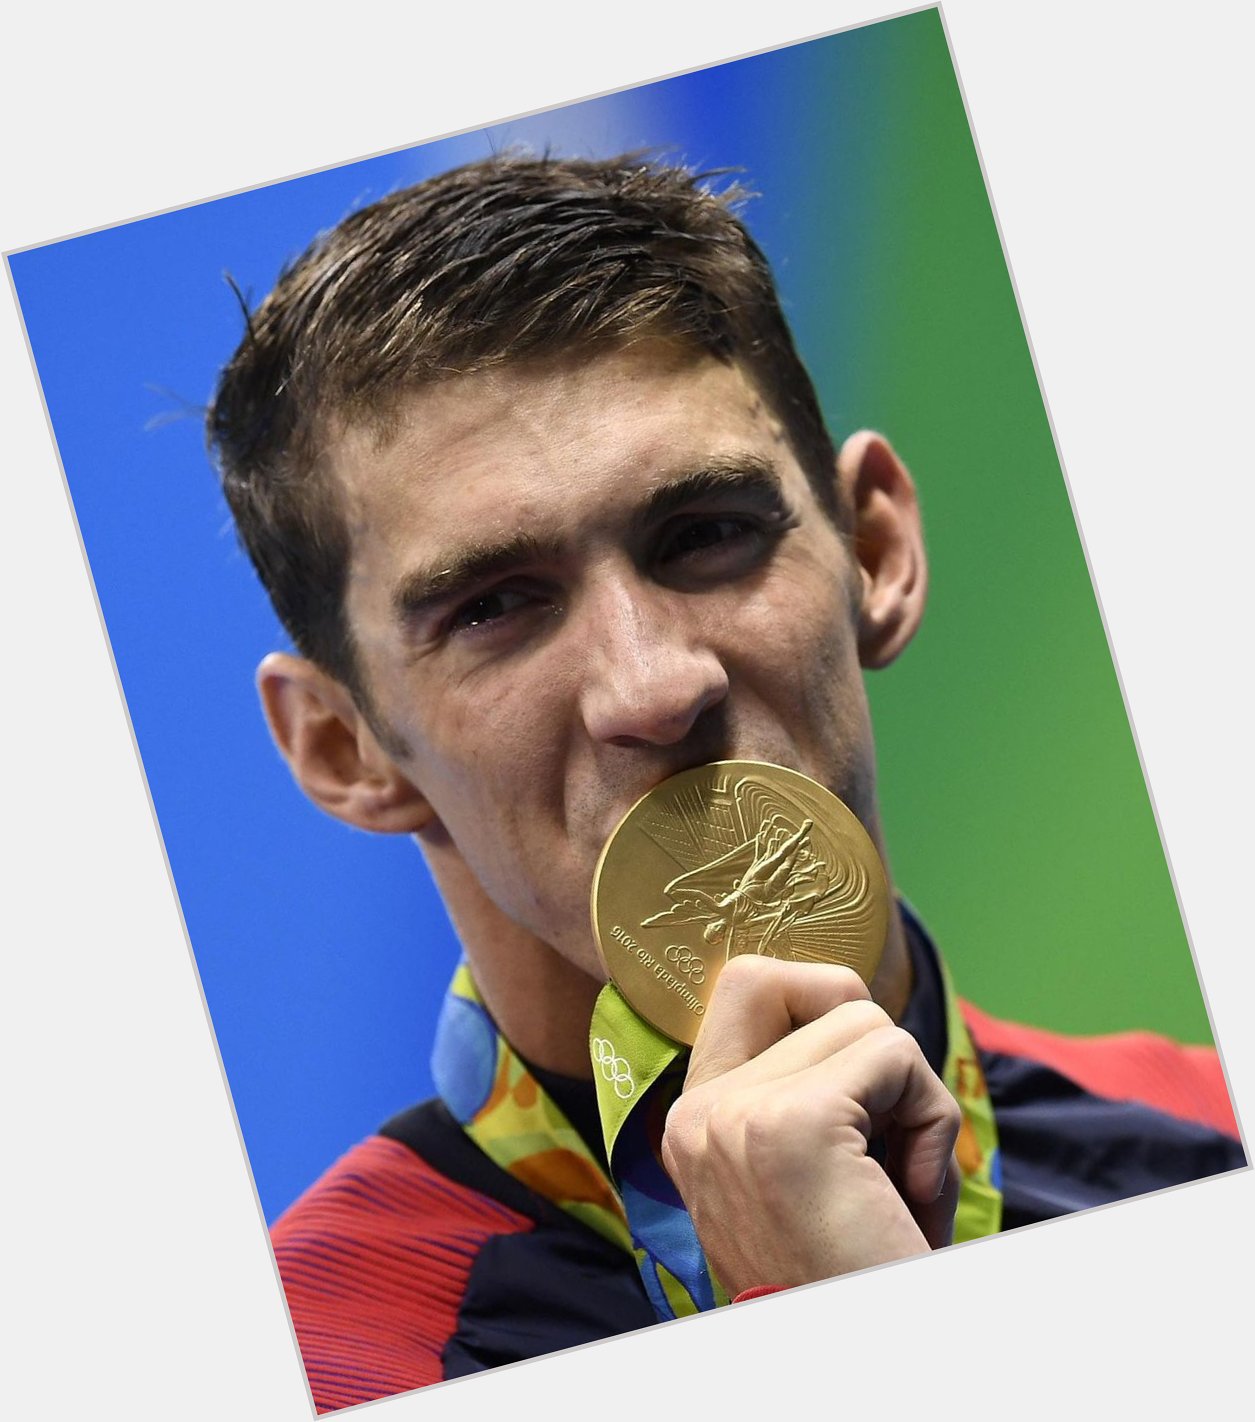 Happy Birthday to 23 time Olympic Gold medalist, Michael Phelps! 